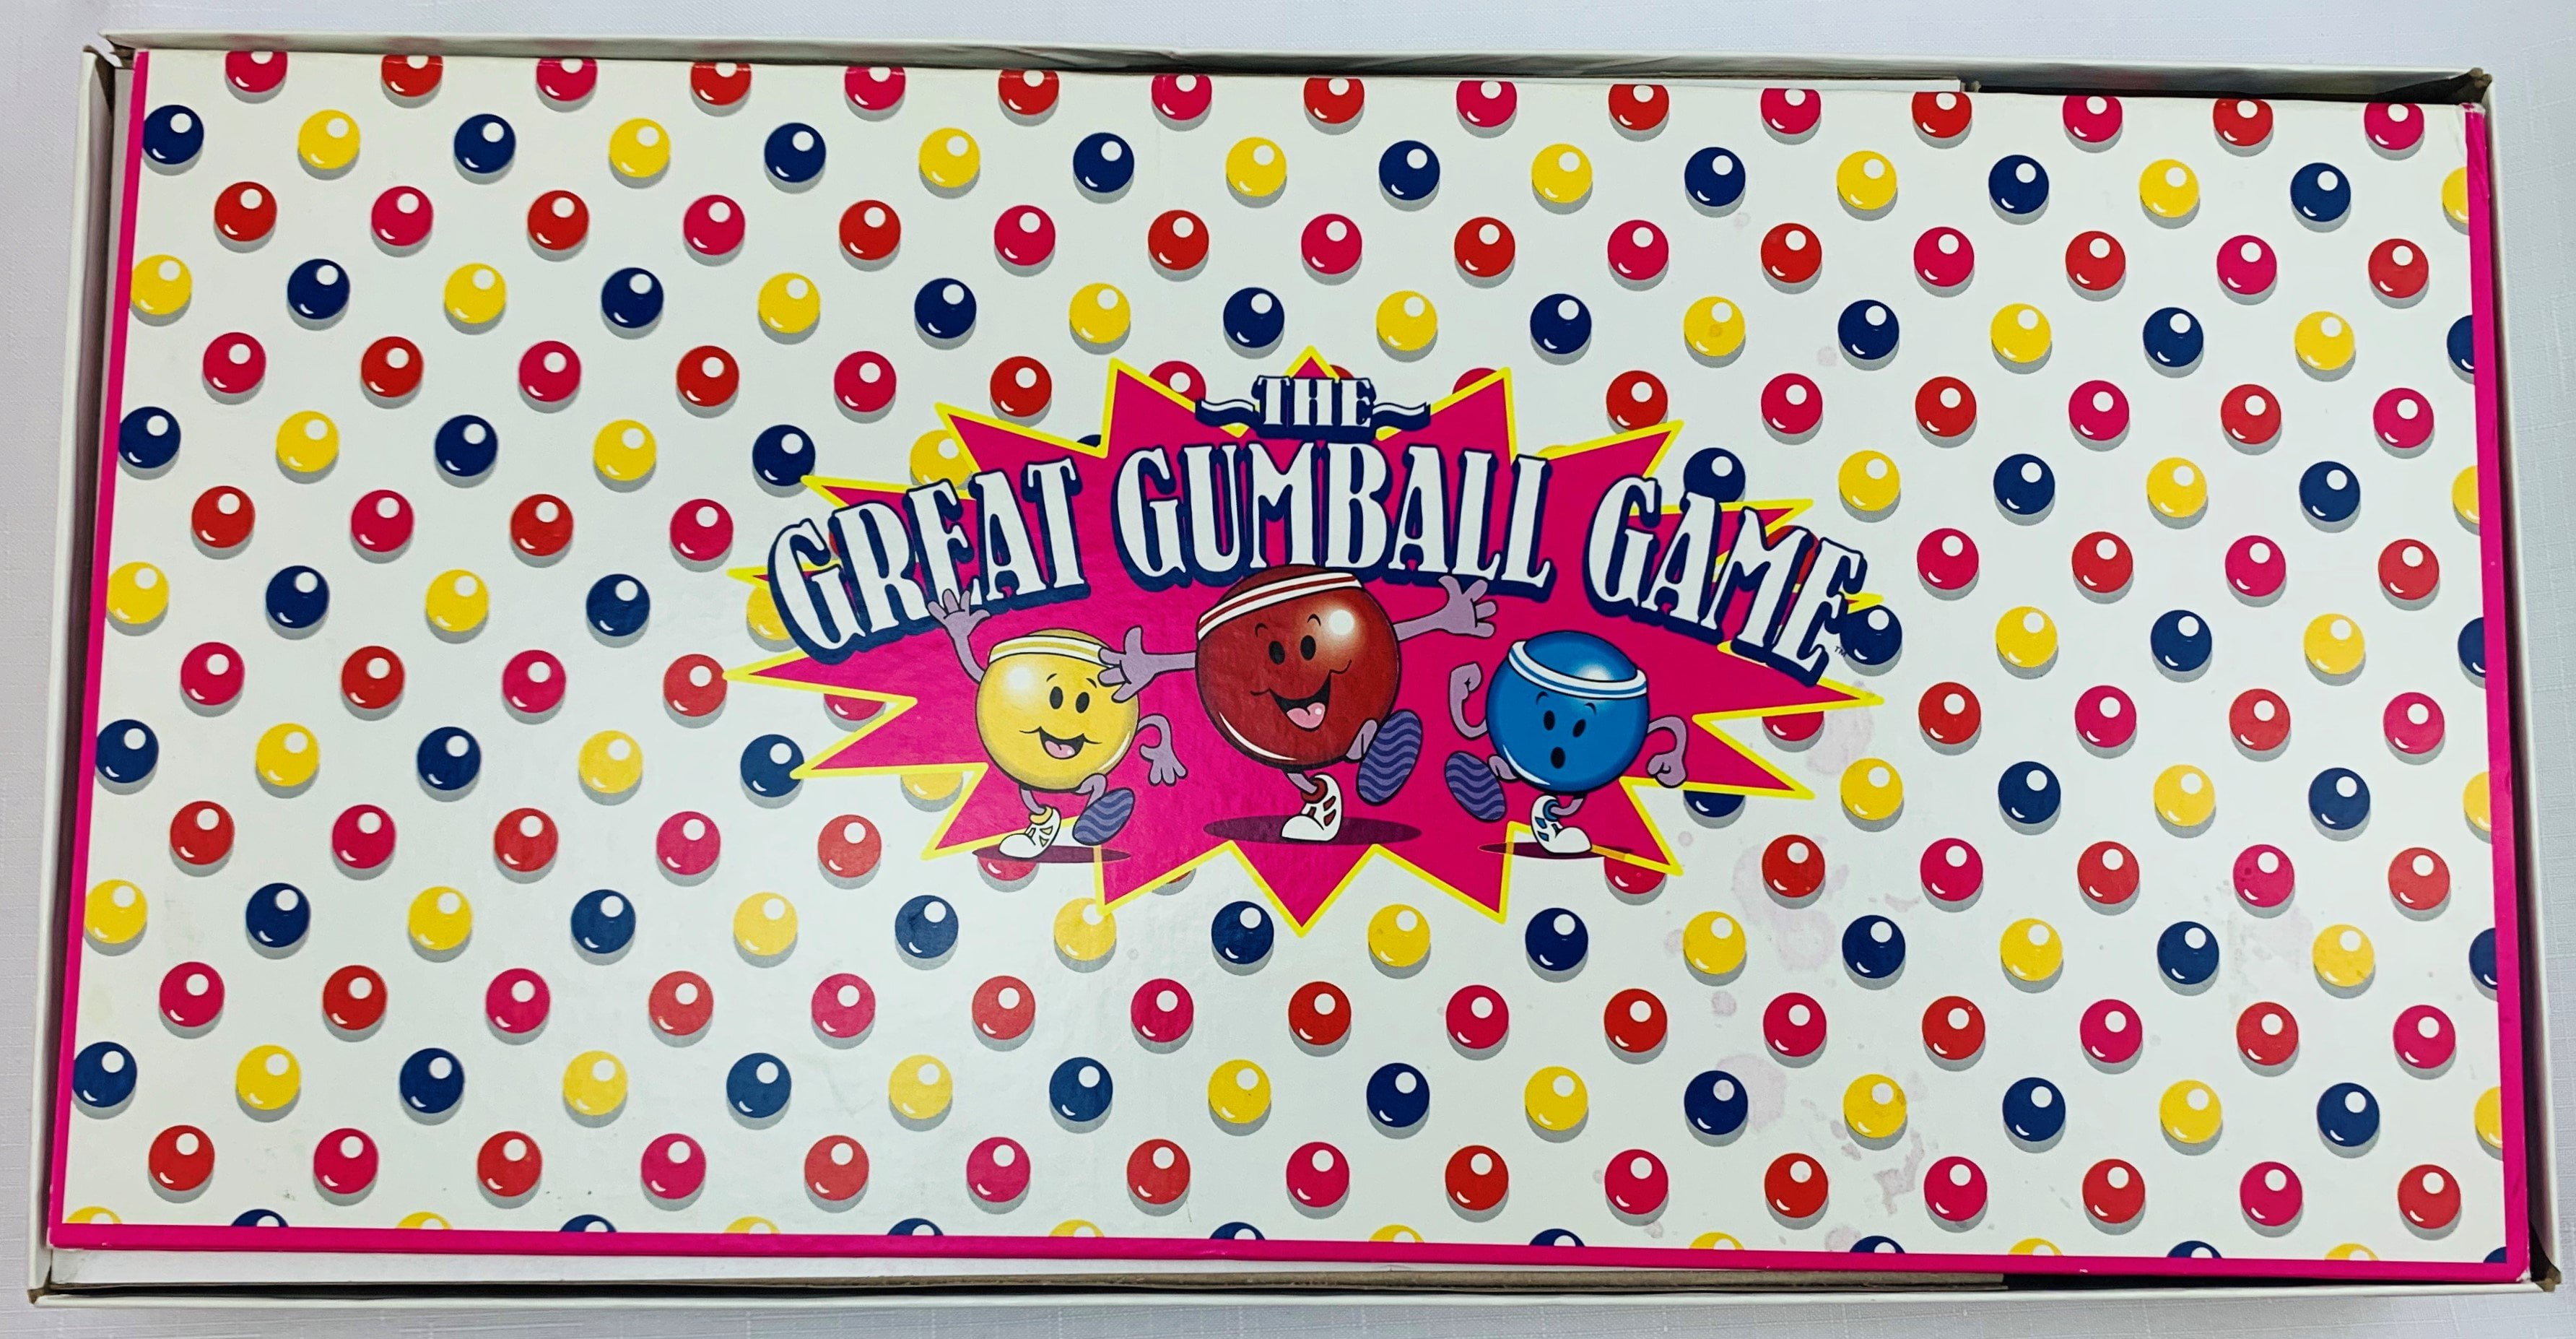 Great Gumball Game - 1995 - RoseArt - Great Condition 